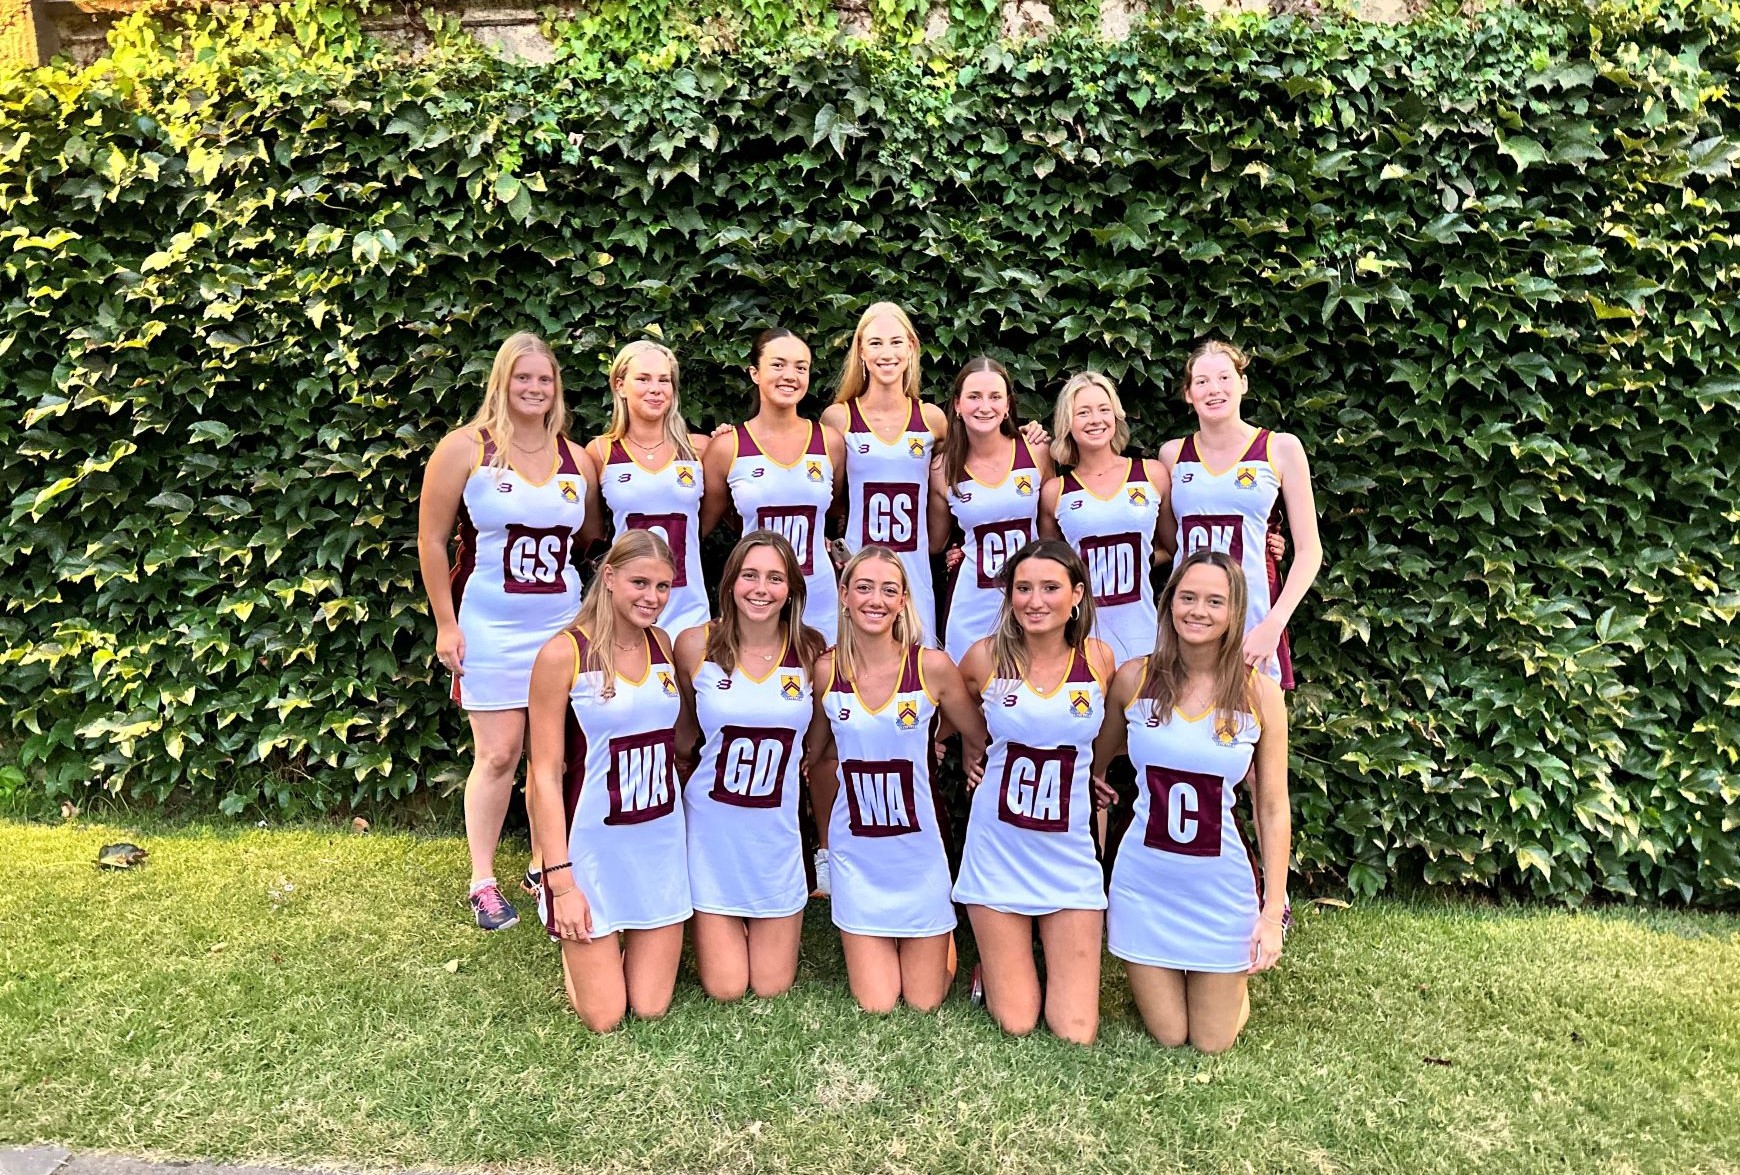 Intercol Rosebowl Netball – our first draw